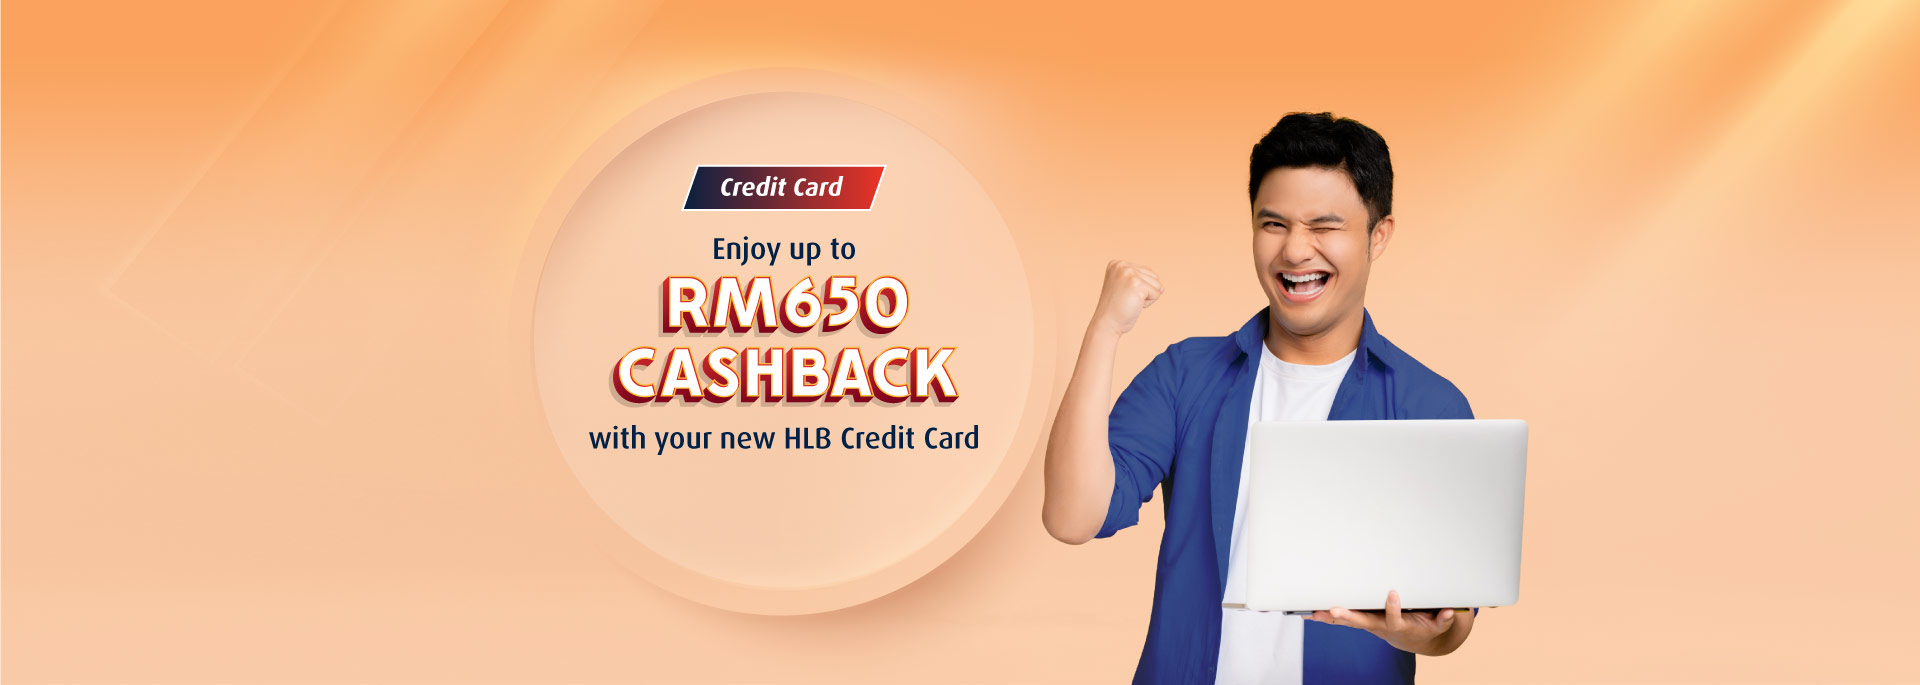 Shopping and getting ready for CNY? Earn cashback when you spend with your new HLB Credit Card.